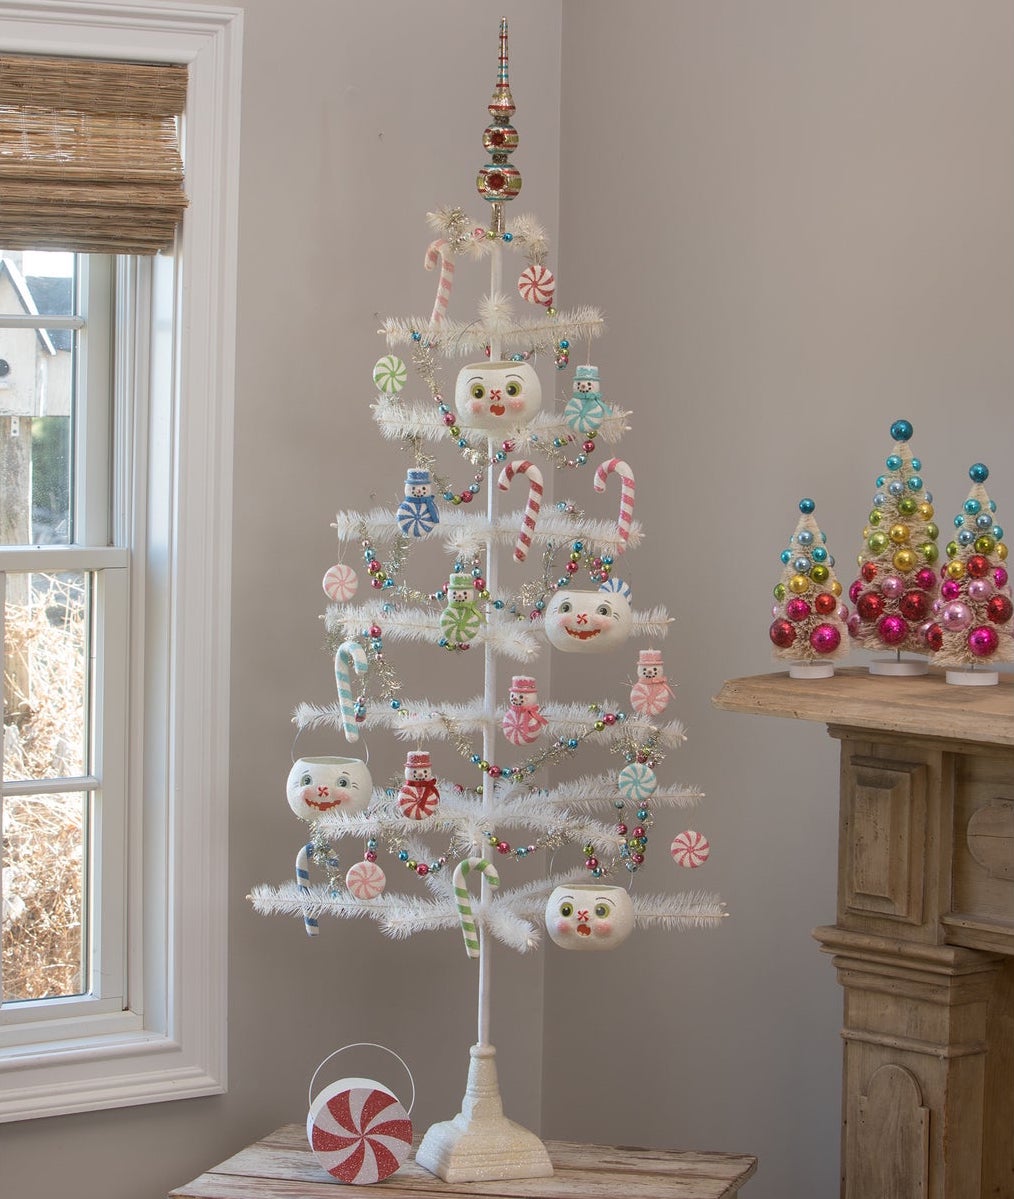 Pastel Candy Christmas Decorations